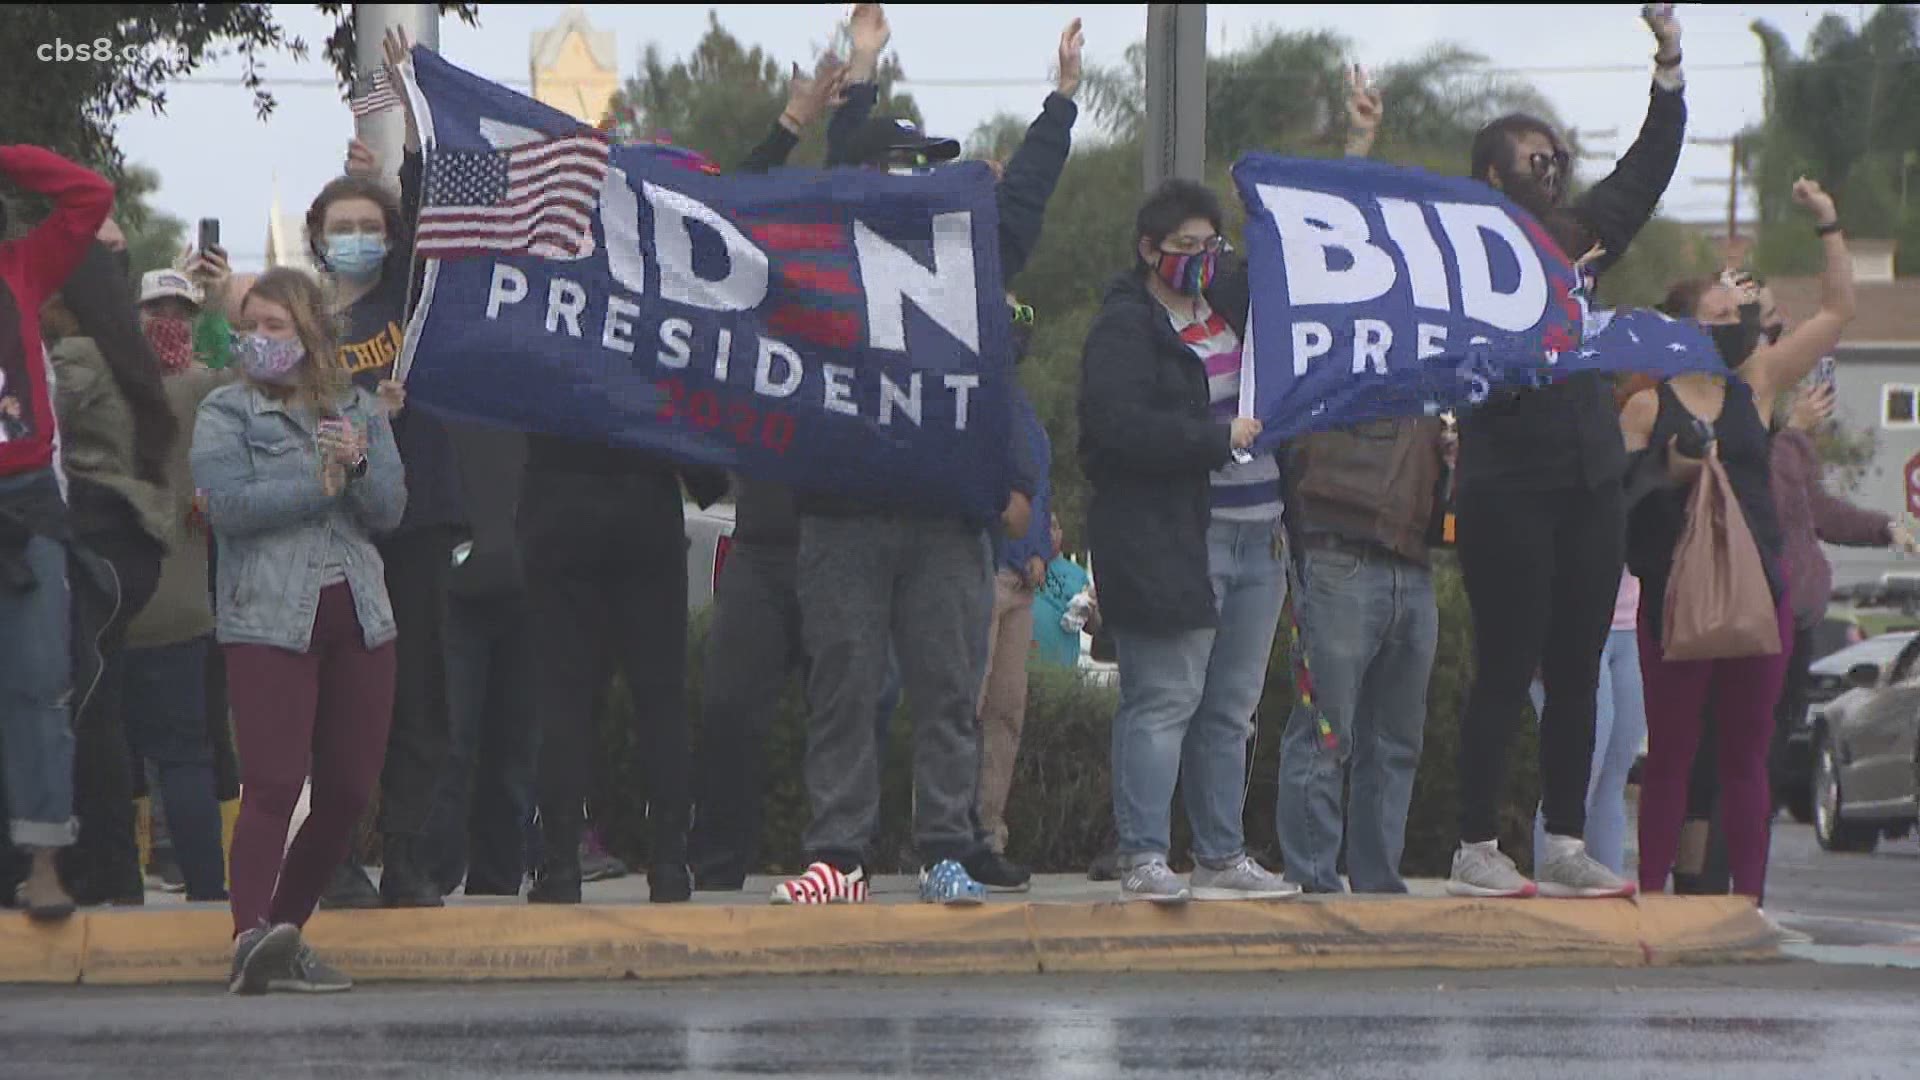 After news broke Saturday morning that Joe Biden was being called as the next president of the United States, many celebrated across San Diego.